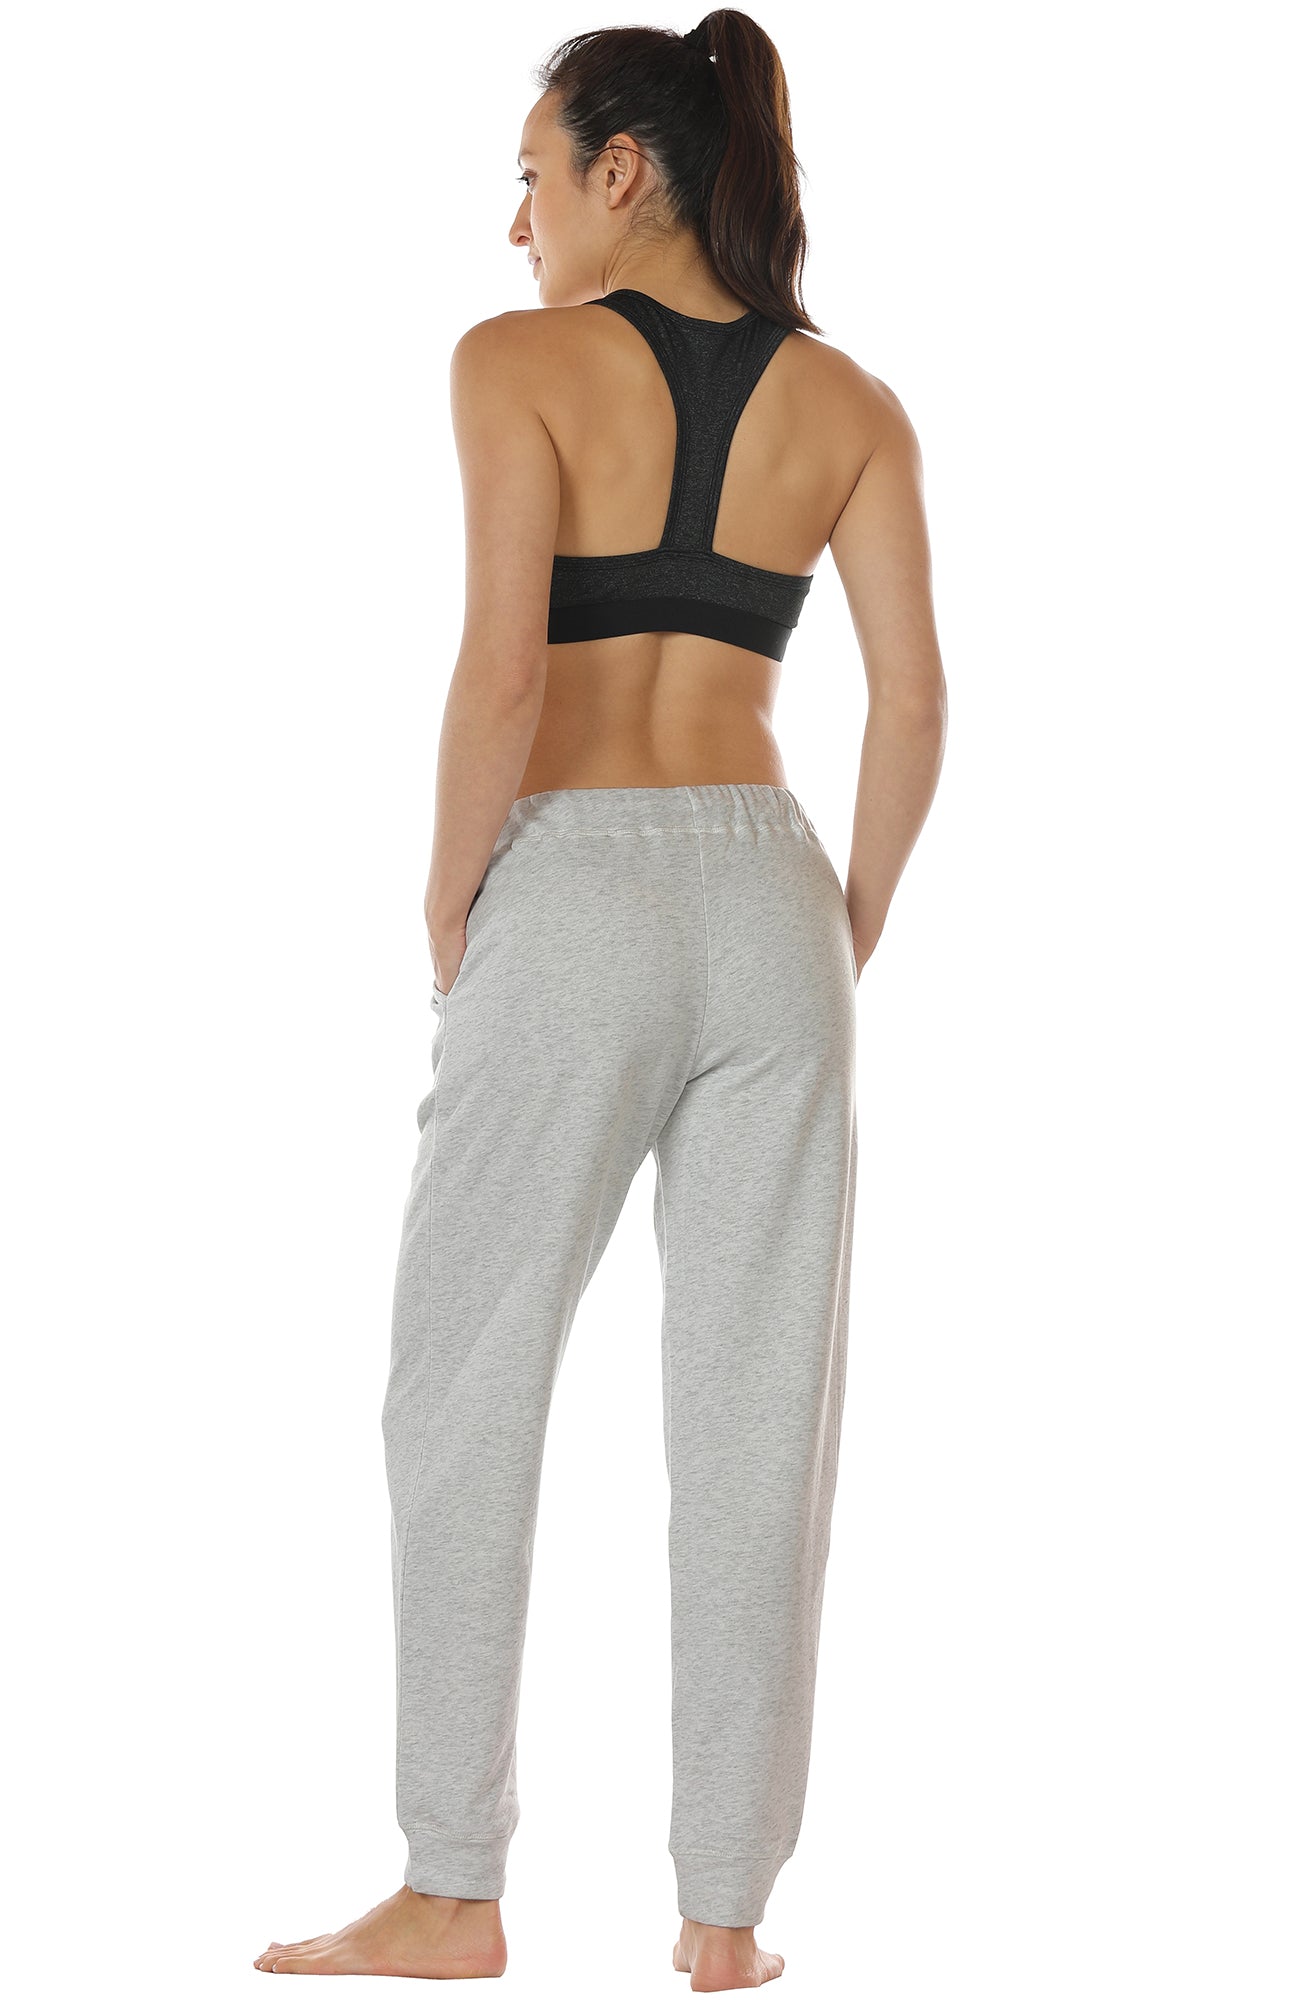  Women's Athletic Sweat Pants Joggers Running Exercise